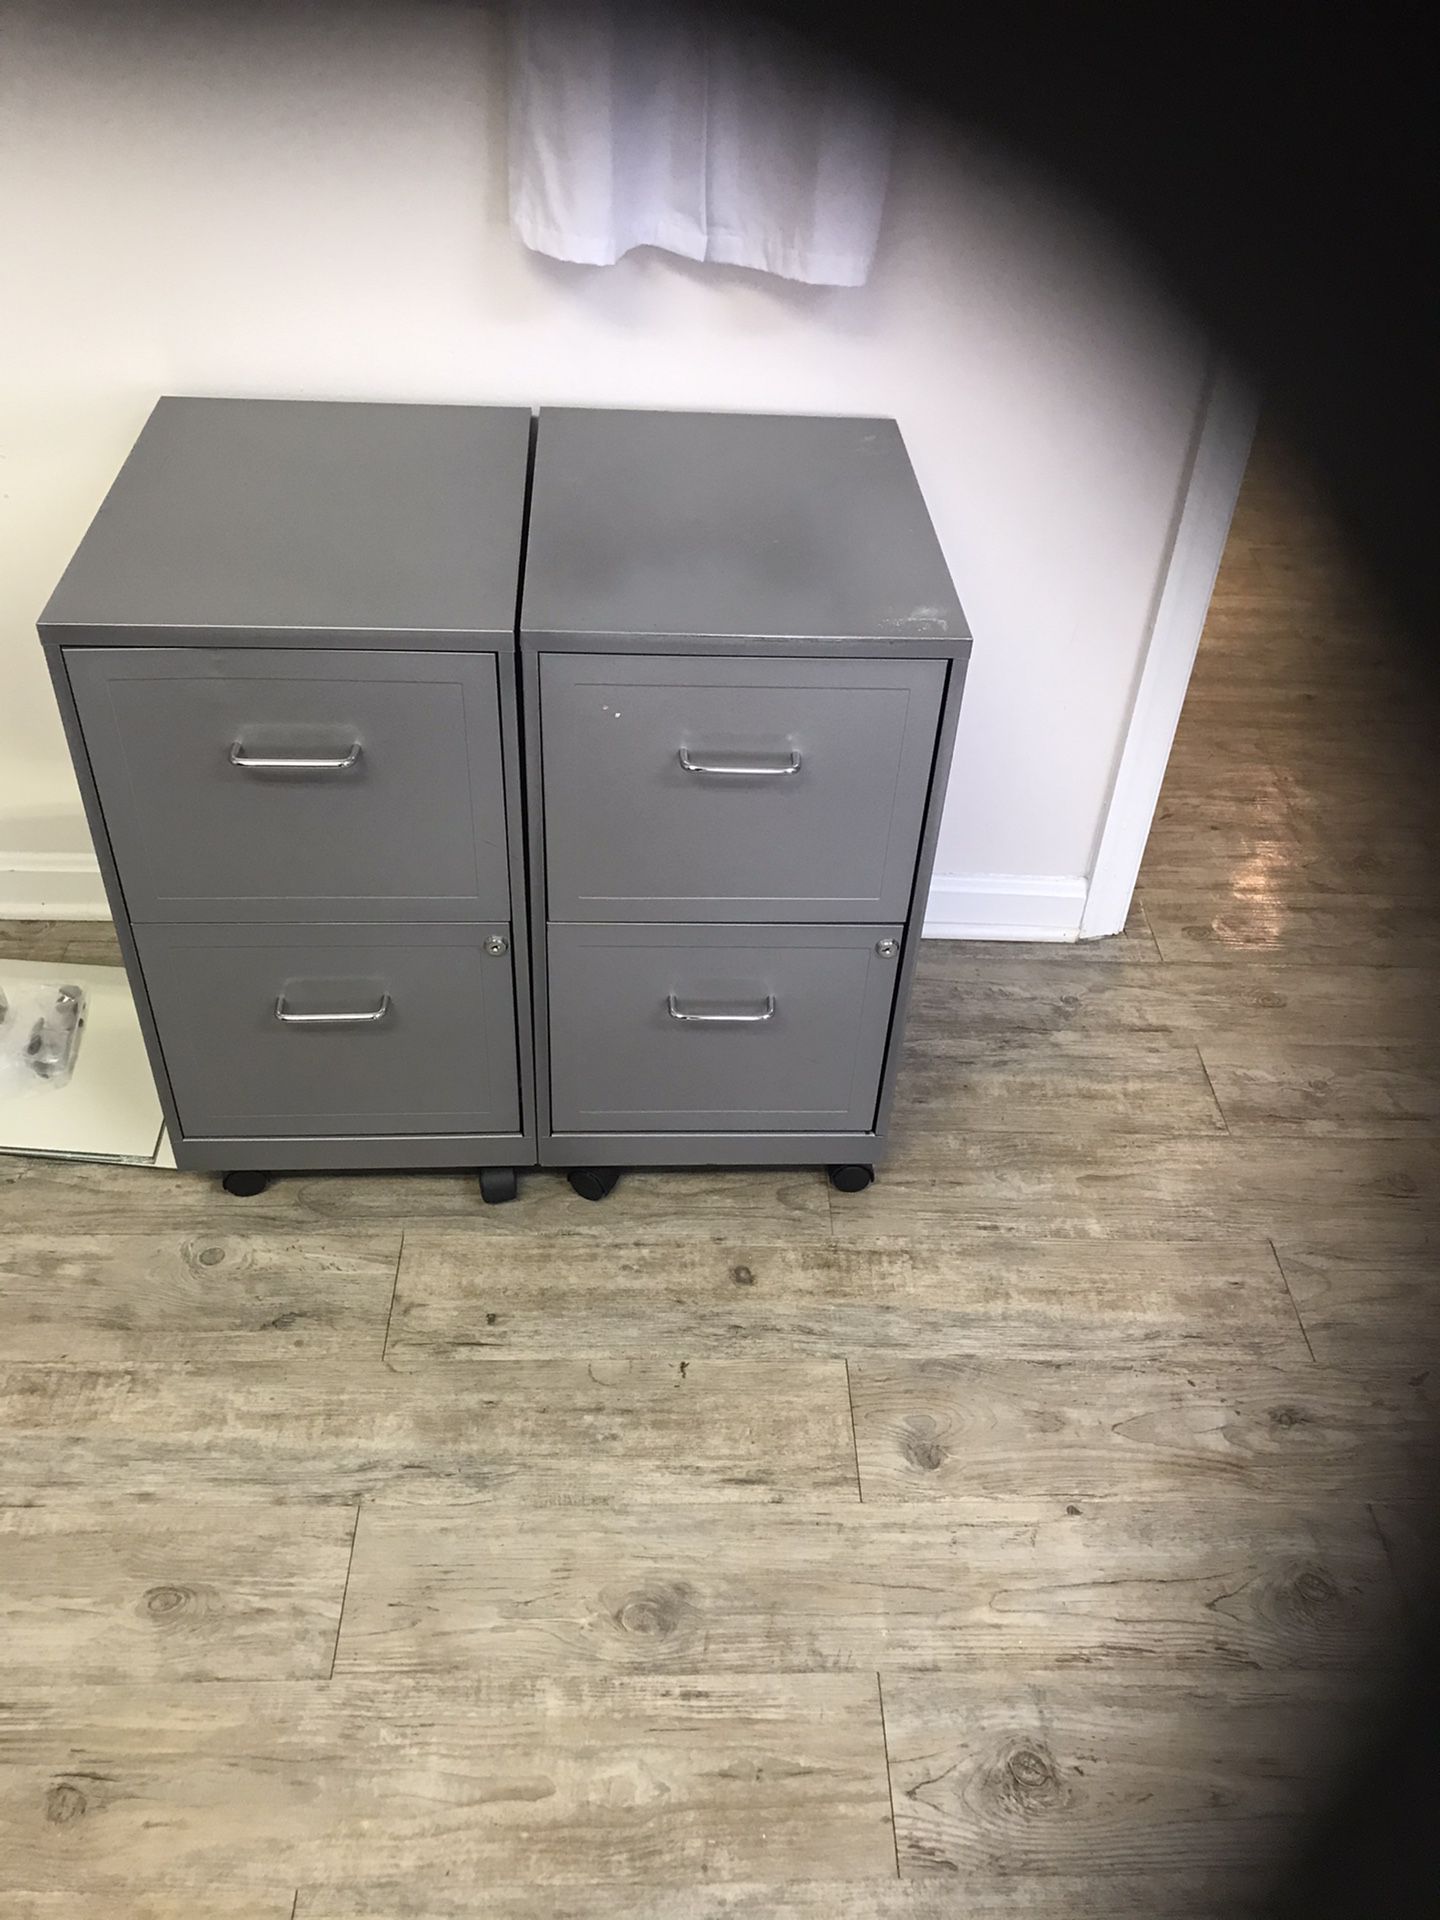 GRAT TWO DRAWER FILE CABINETS